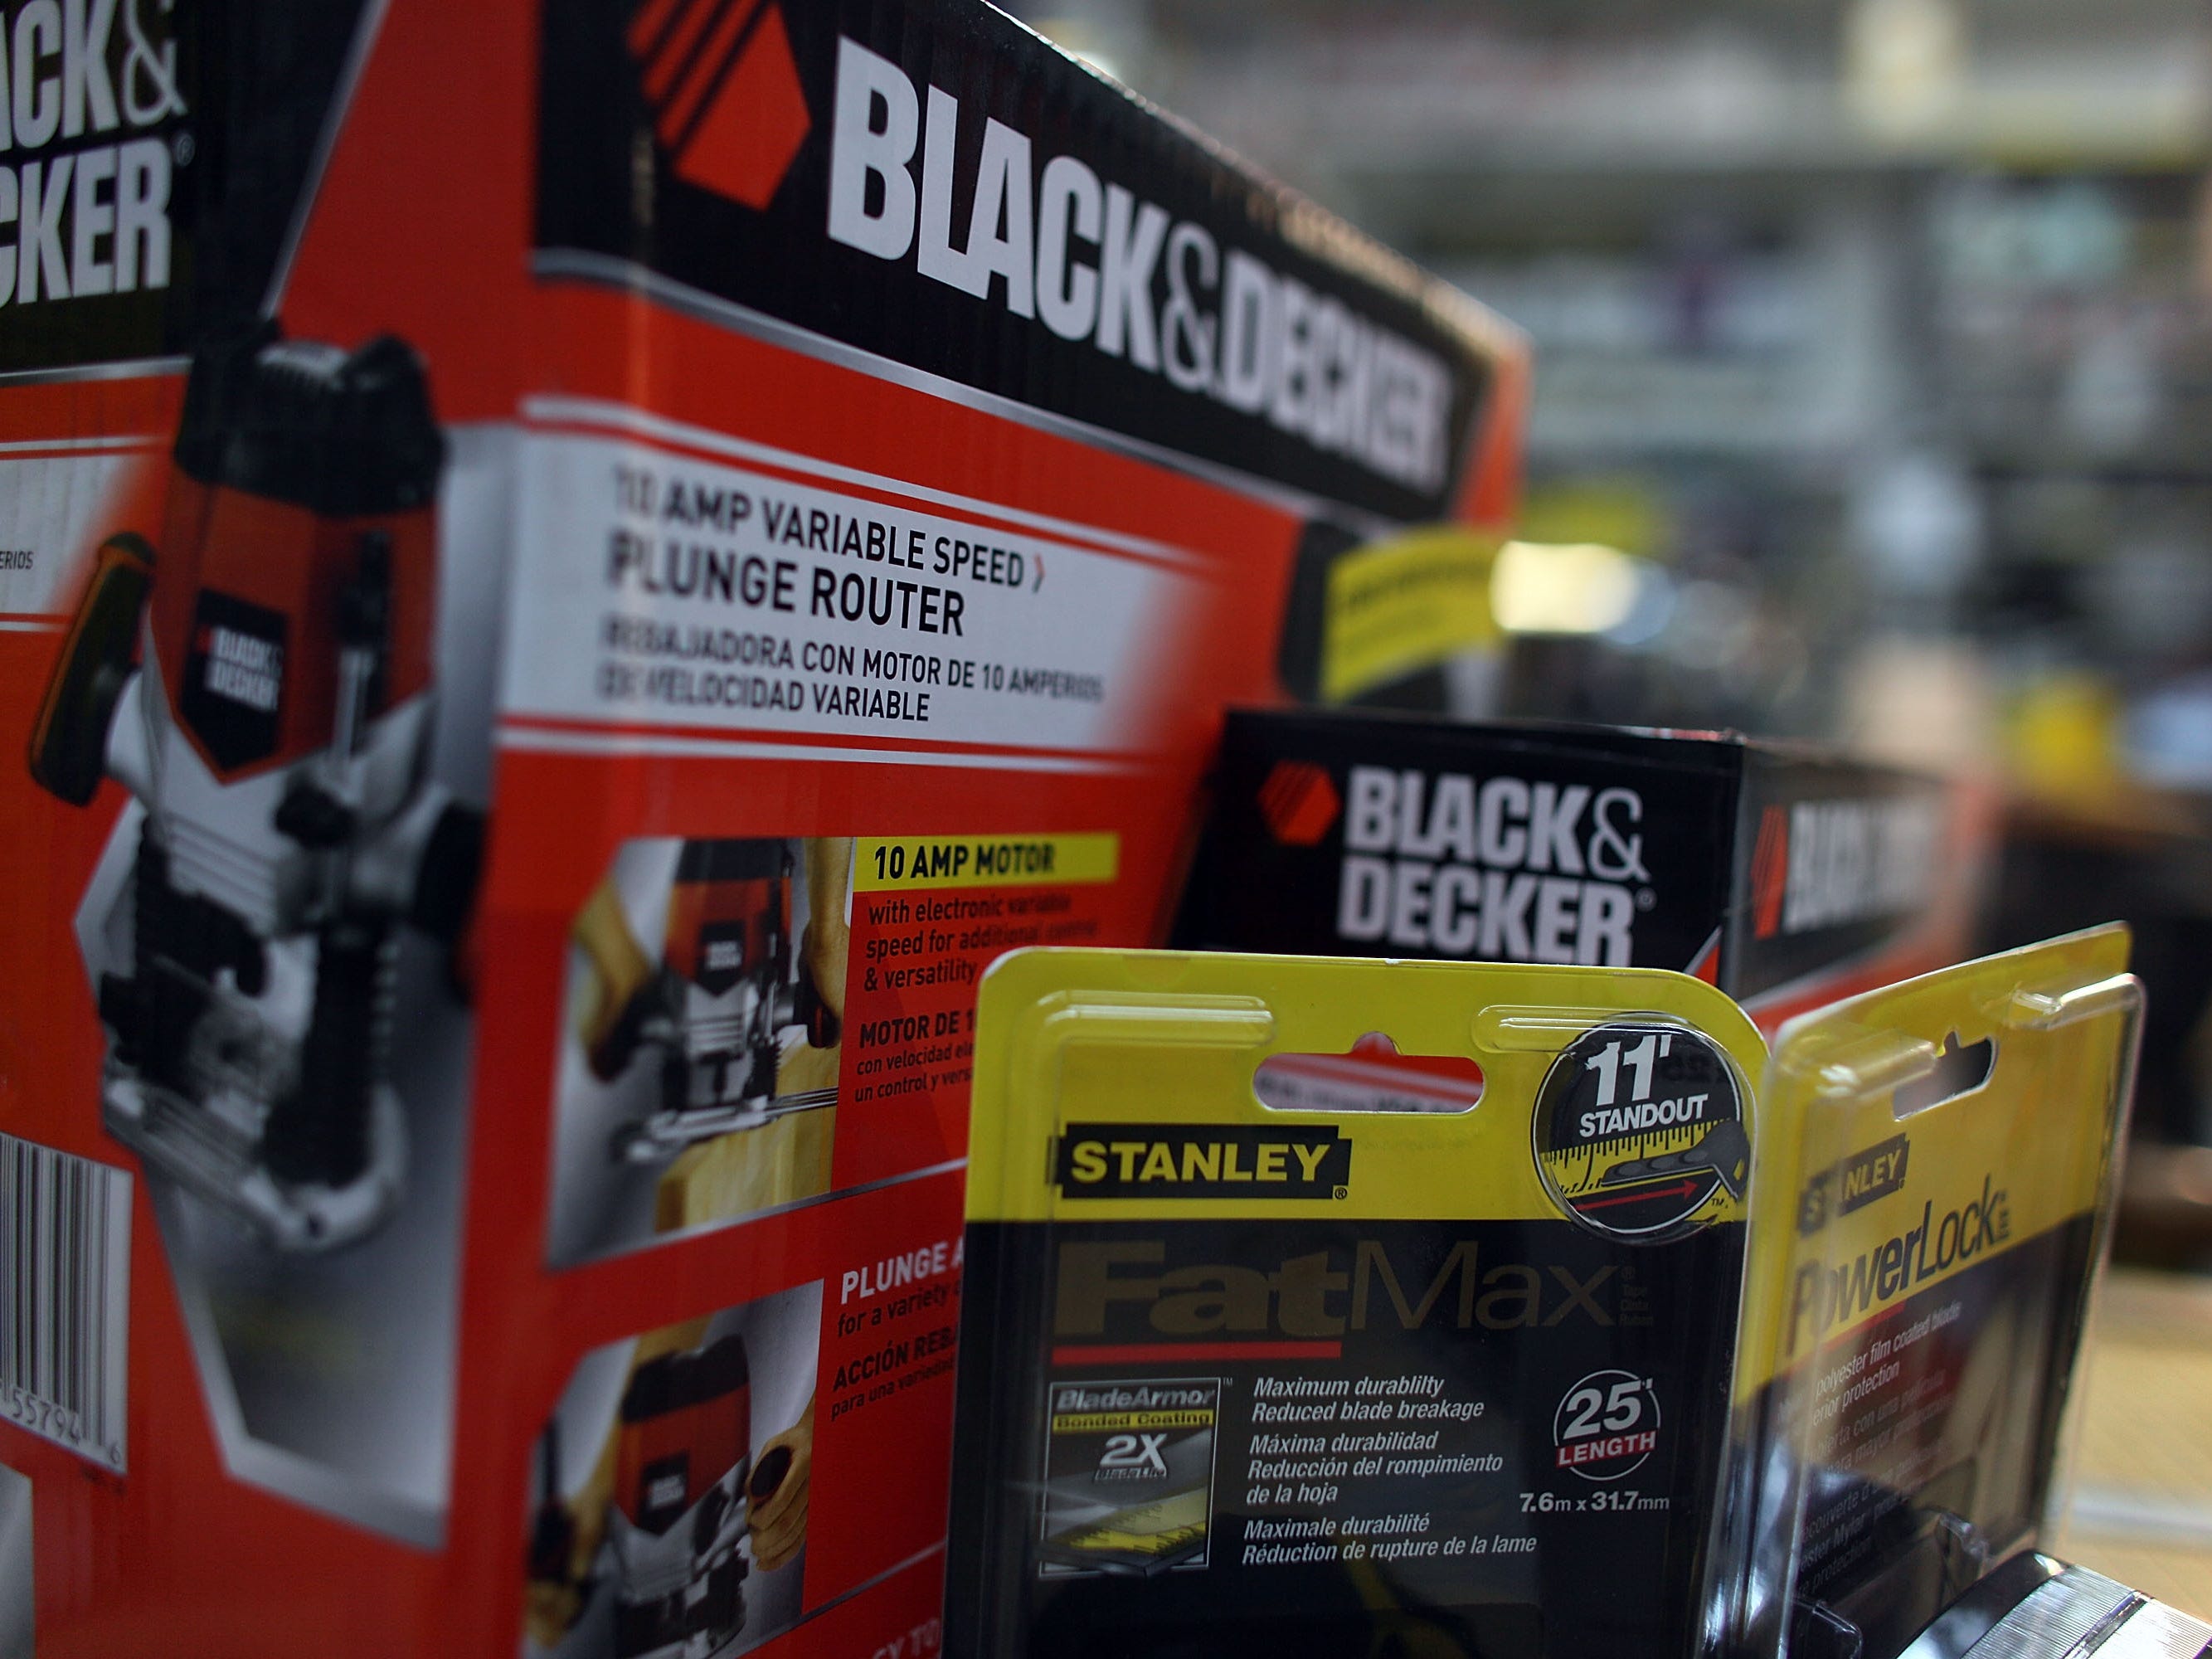 Stanley Black & Decker (SWK): An Appealing Value or a Potential Trap?